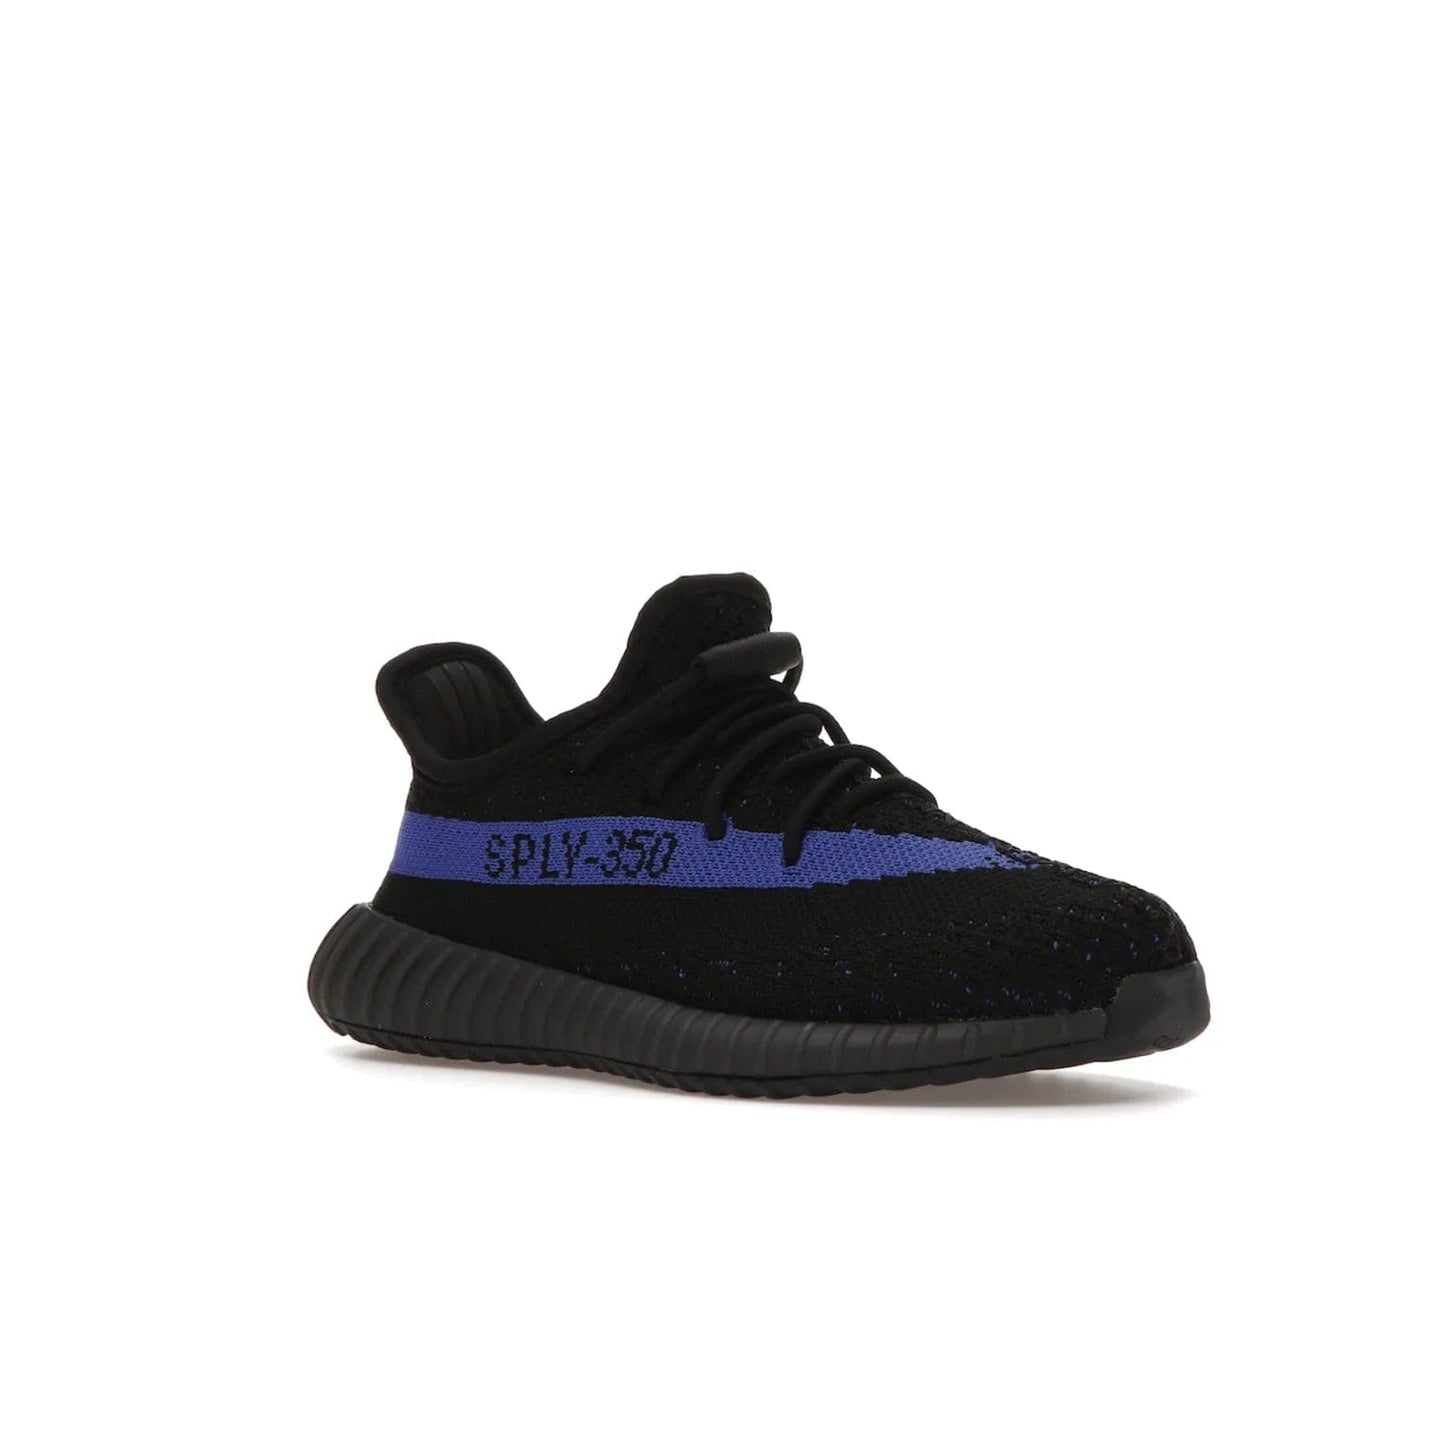 adidas Yeezy Boost 350 V2 Dazzling Blue (Kids) - Image 5 - Only at www.BallersClubKickz.com - Shop the adidas Yeezy Boost 350 V2 Dazzling Blue (Kids). Features a black Primeknit upper with a royal blue 'SPLY-350' streak and a full-length Boost midsole. Durable rubber outsole provides plenty of traction. Available for $160.